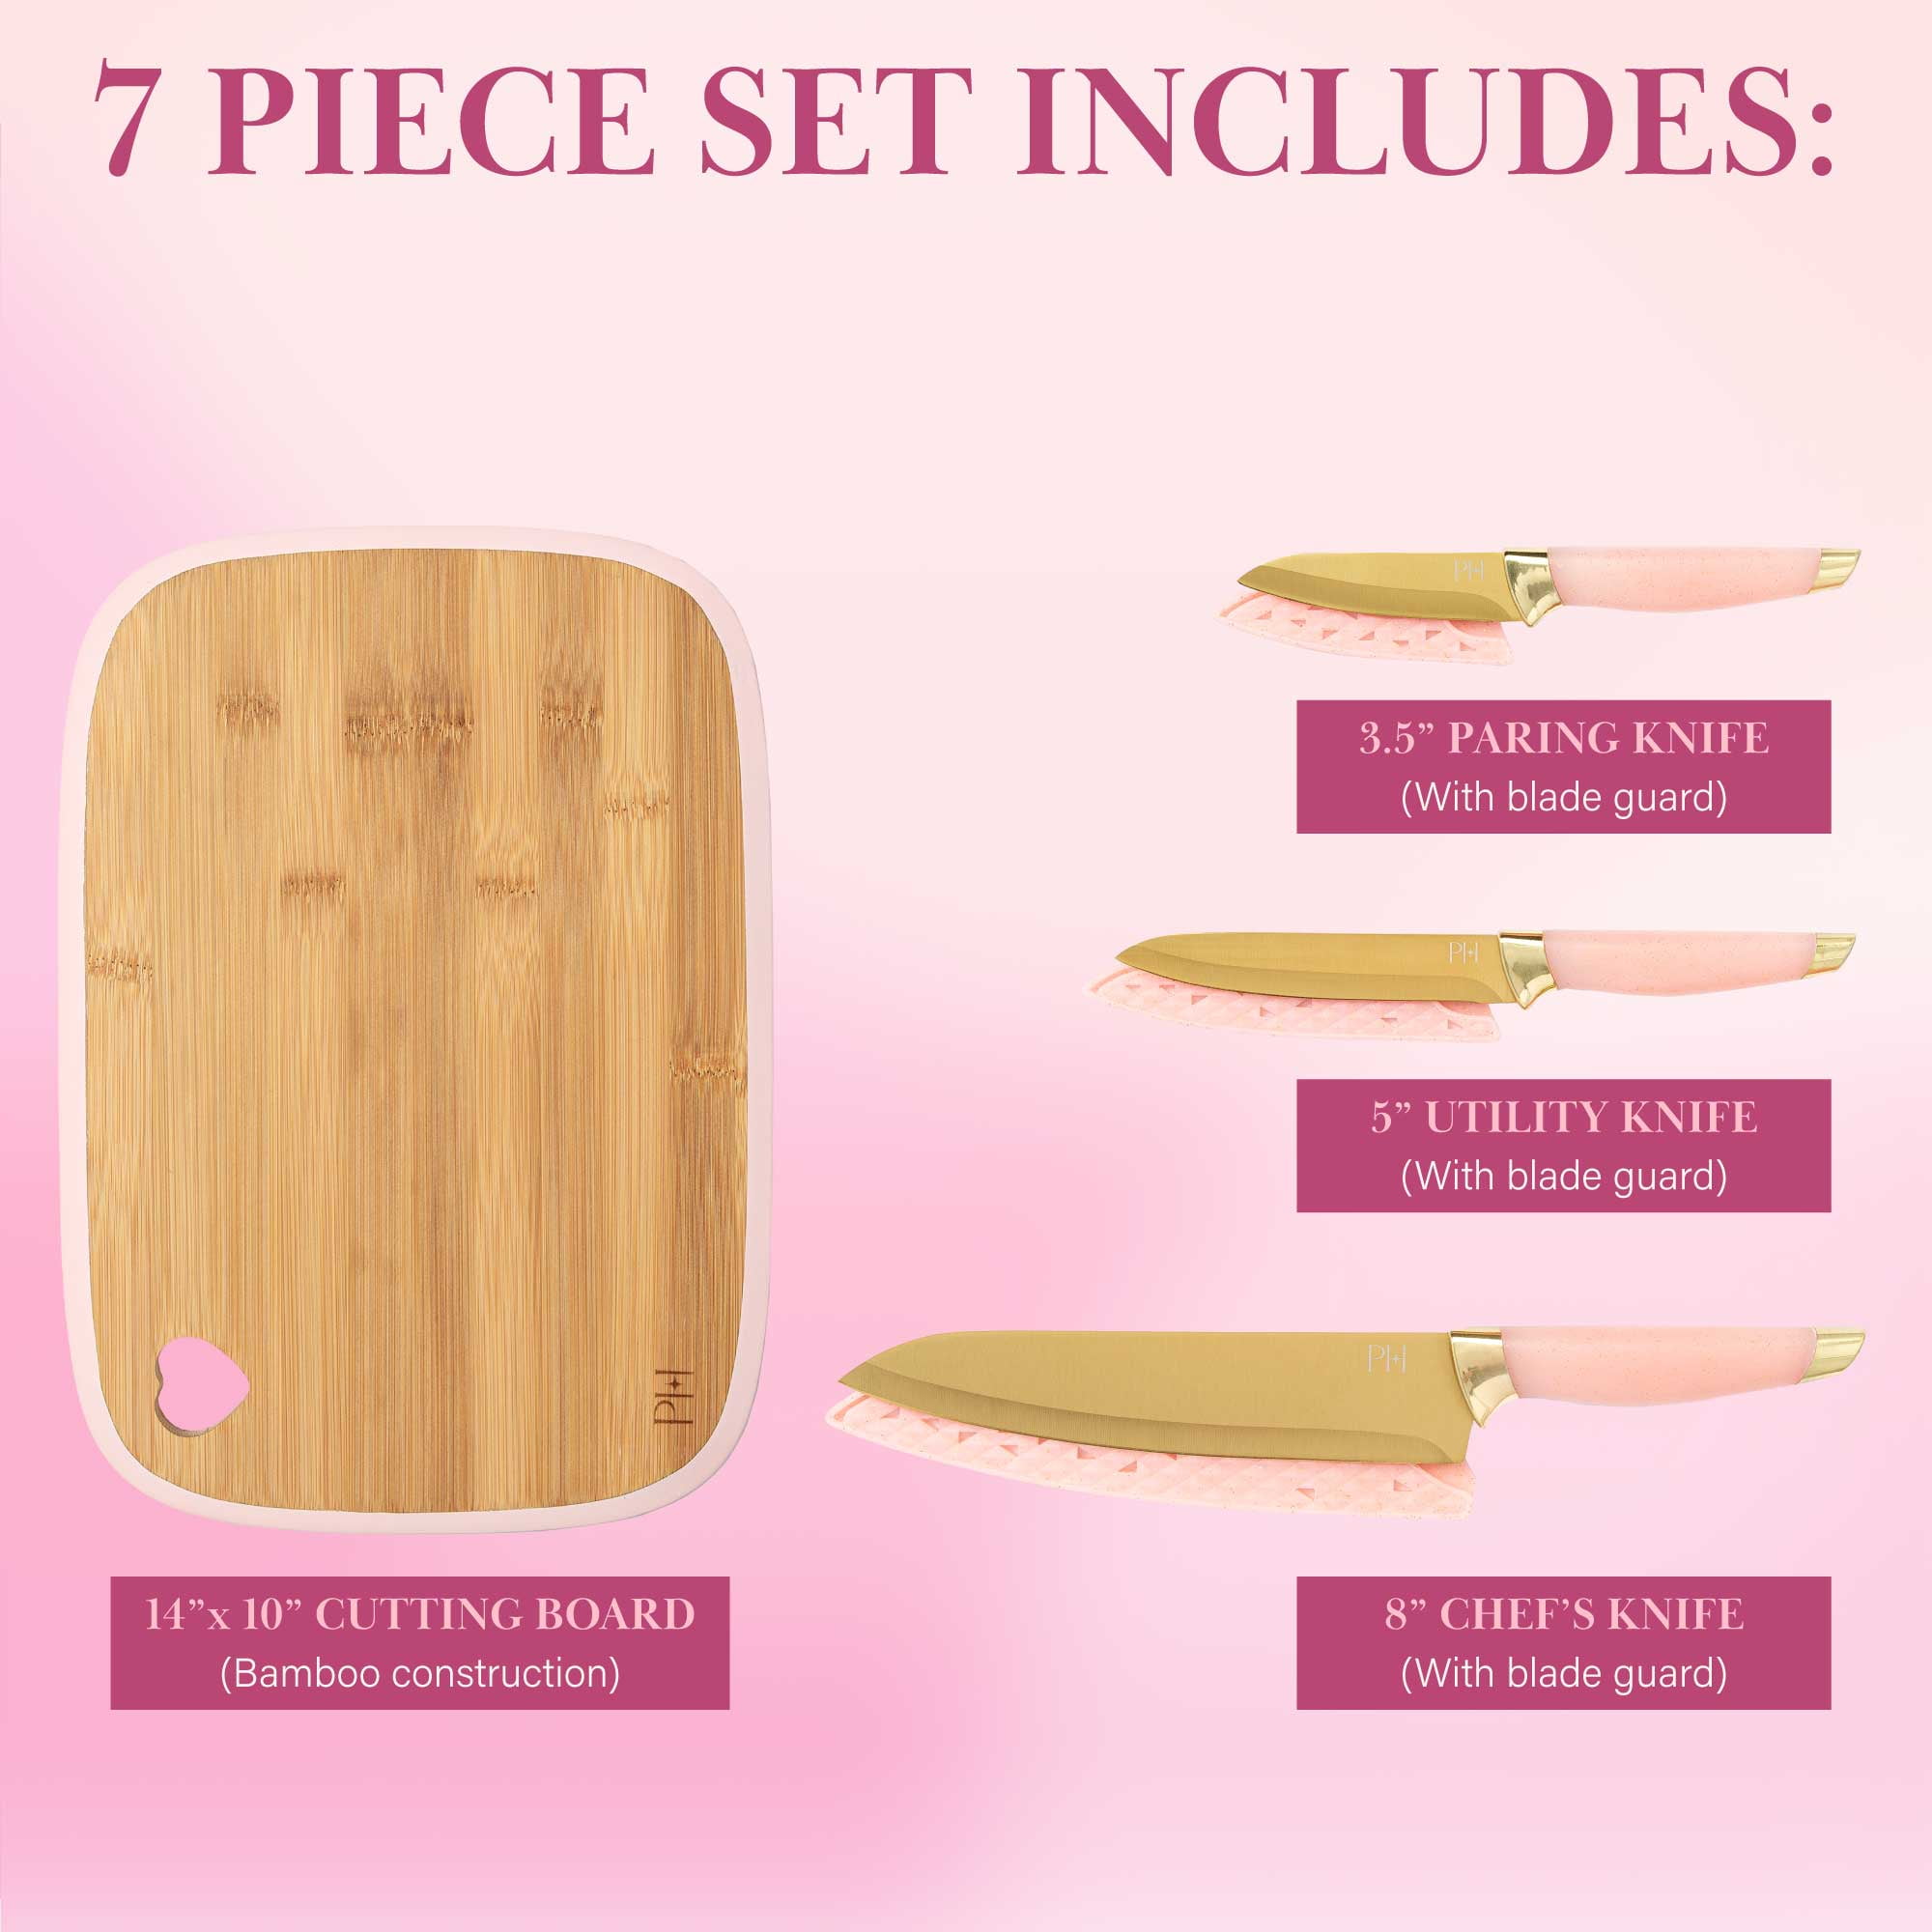  Paris Hilton Reversible Bamboo Cutting Board and Cutlery Set  with Matching High Carbon Stainless Steel Knives, Blade Guards, Sleek Yet  Comfortable Handle Grips, 7-Piece Set Gold, Charcoal Gray: Home & Kitchen